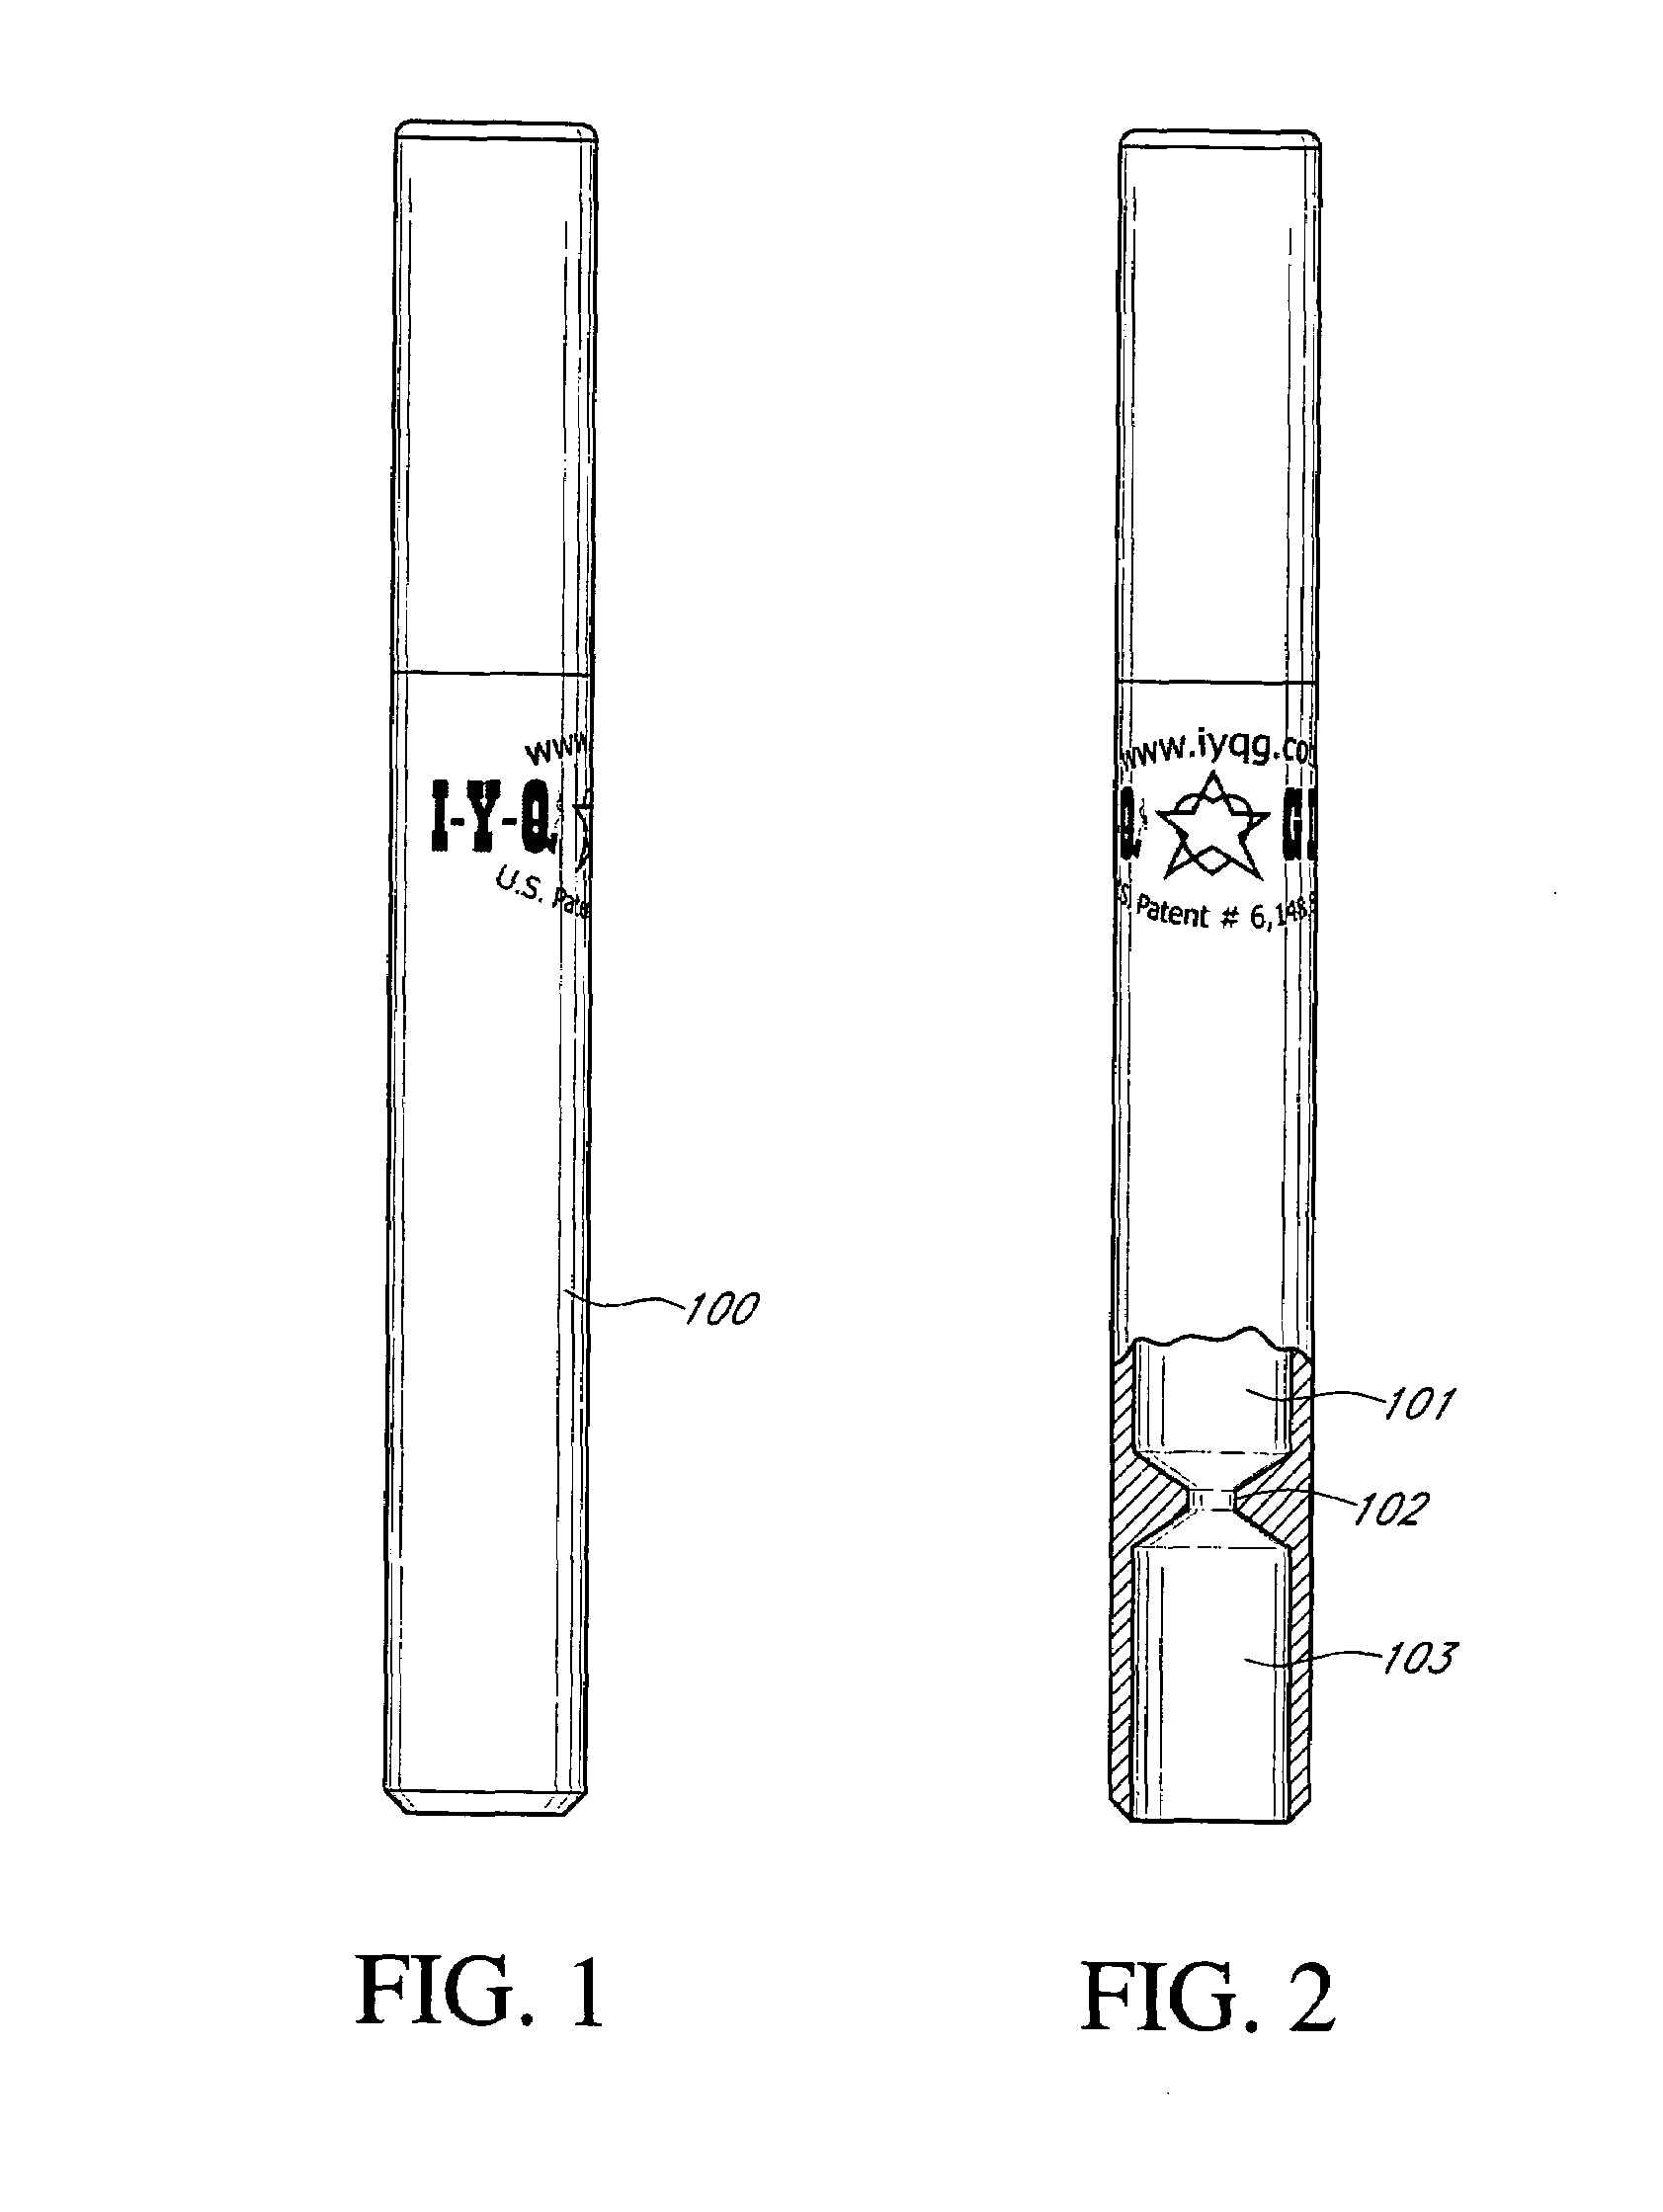 Method for controlling, reducing, and quitting smoking